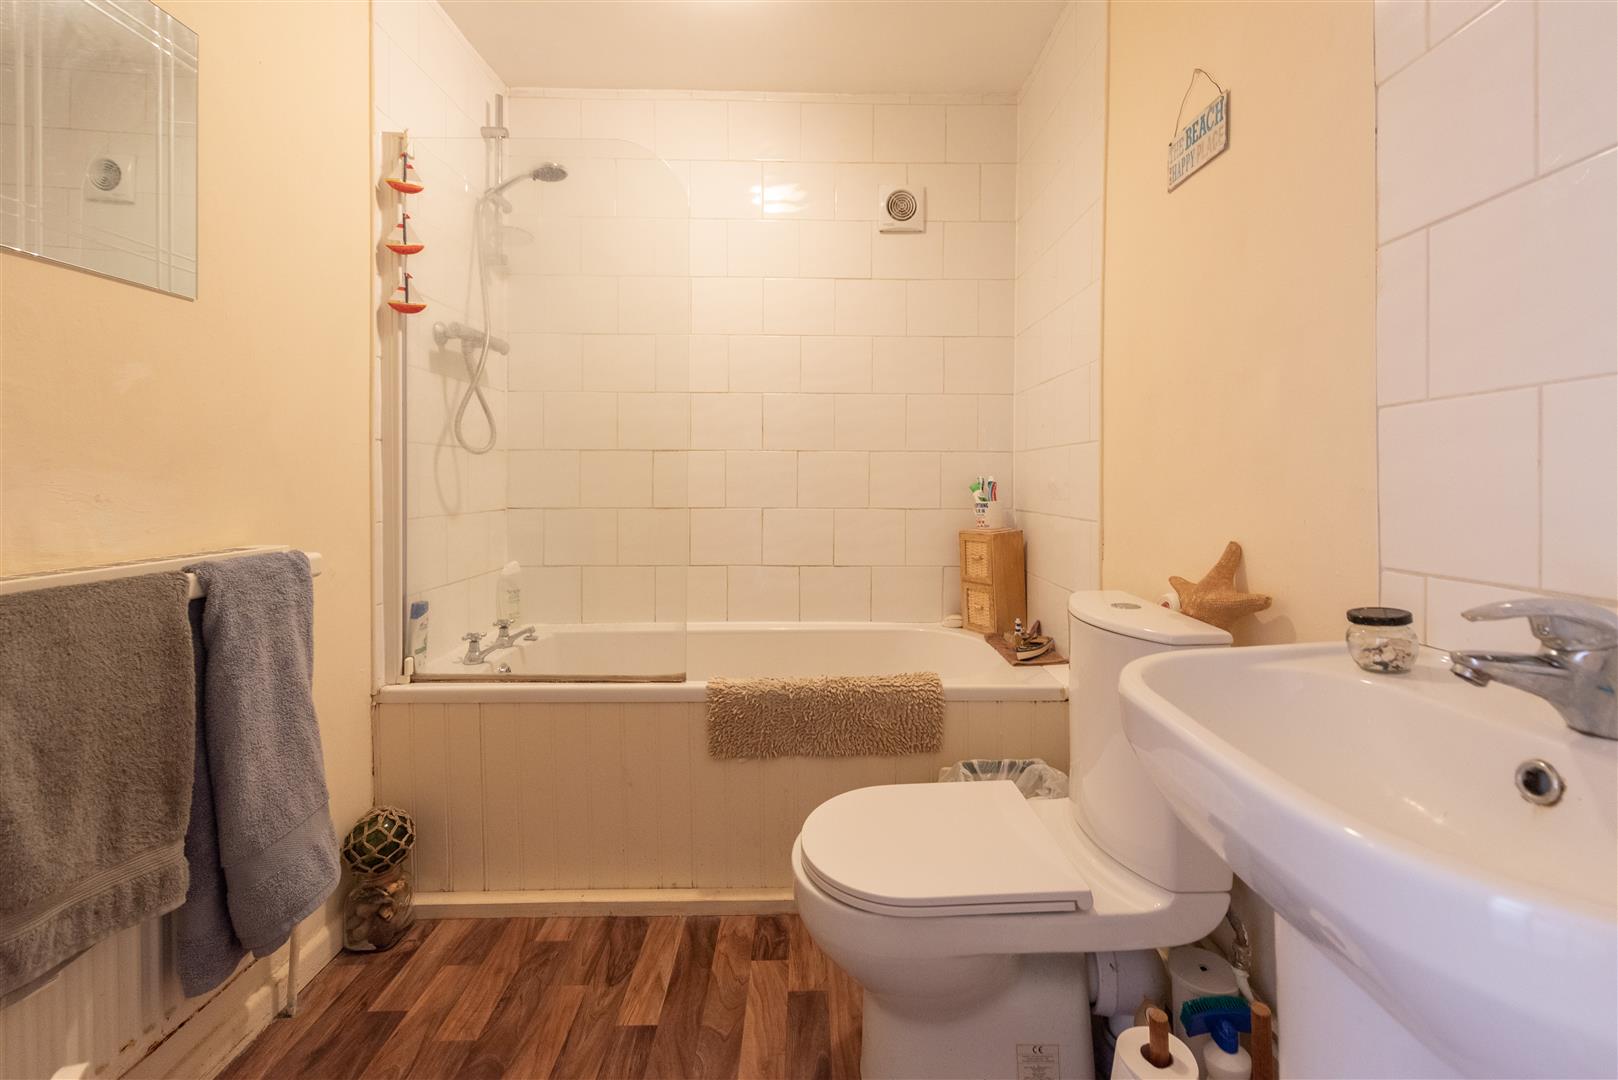 a bathroom with a bath tub, commode, and sink